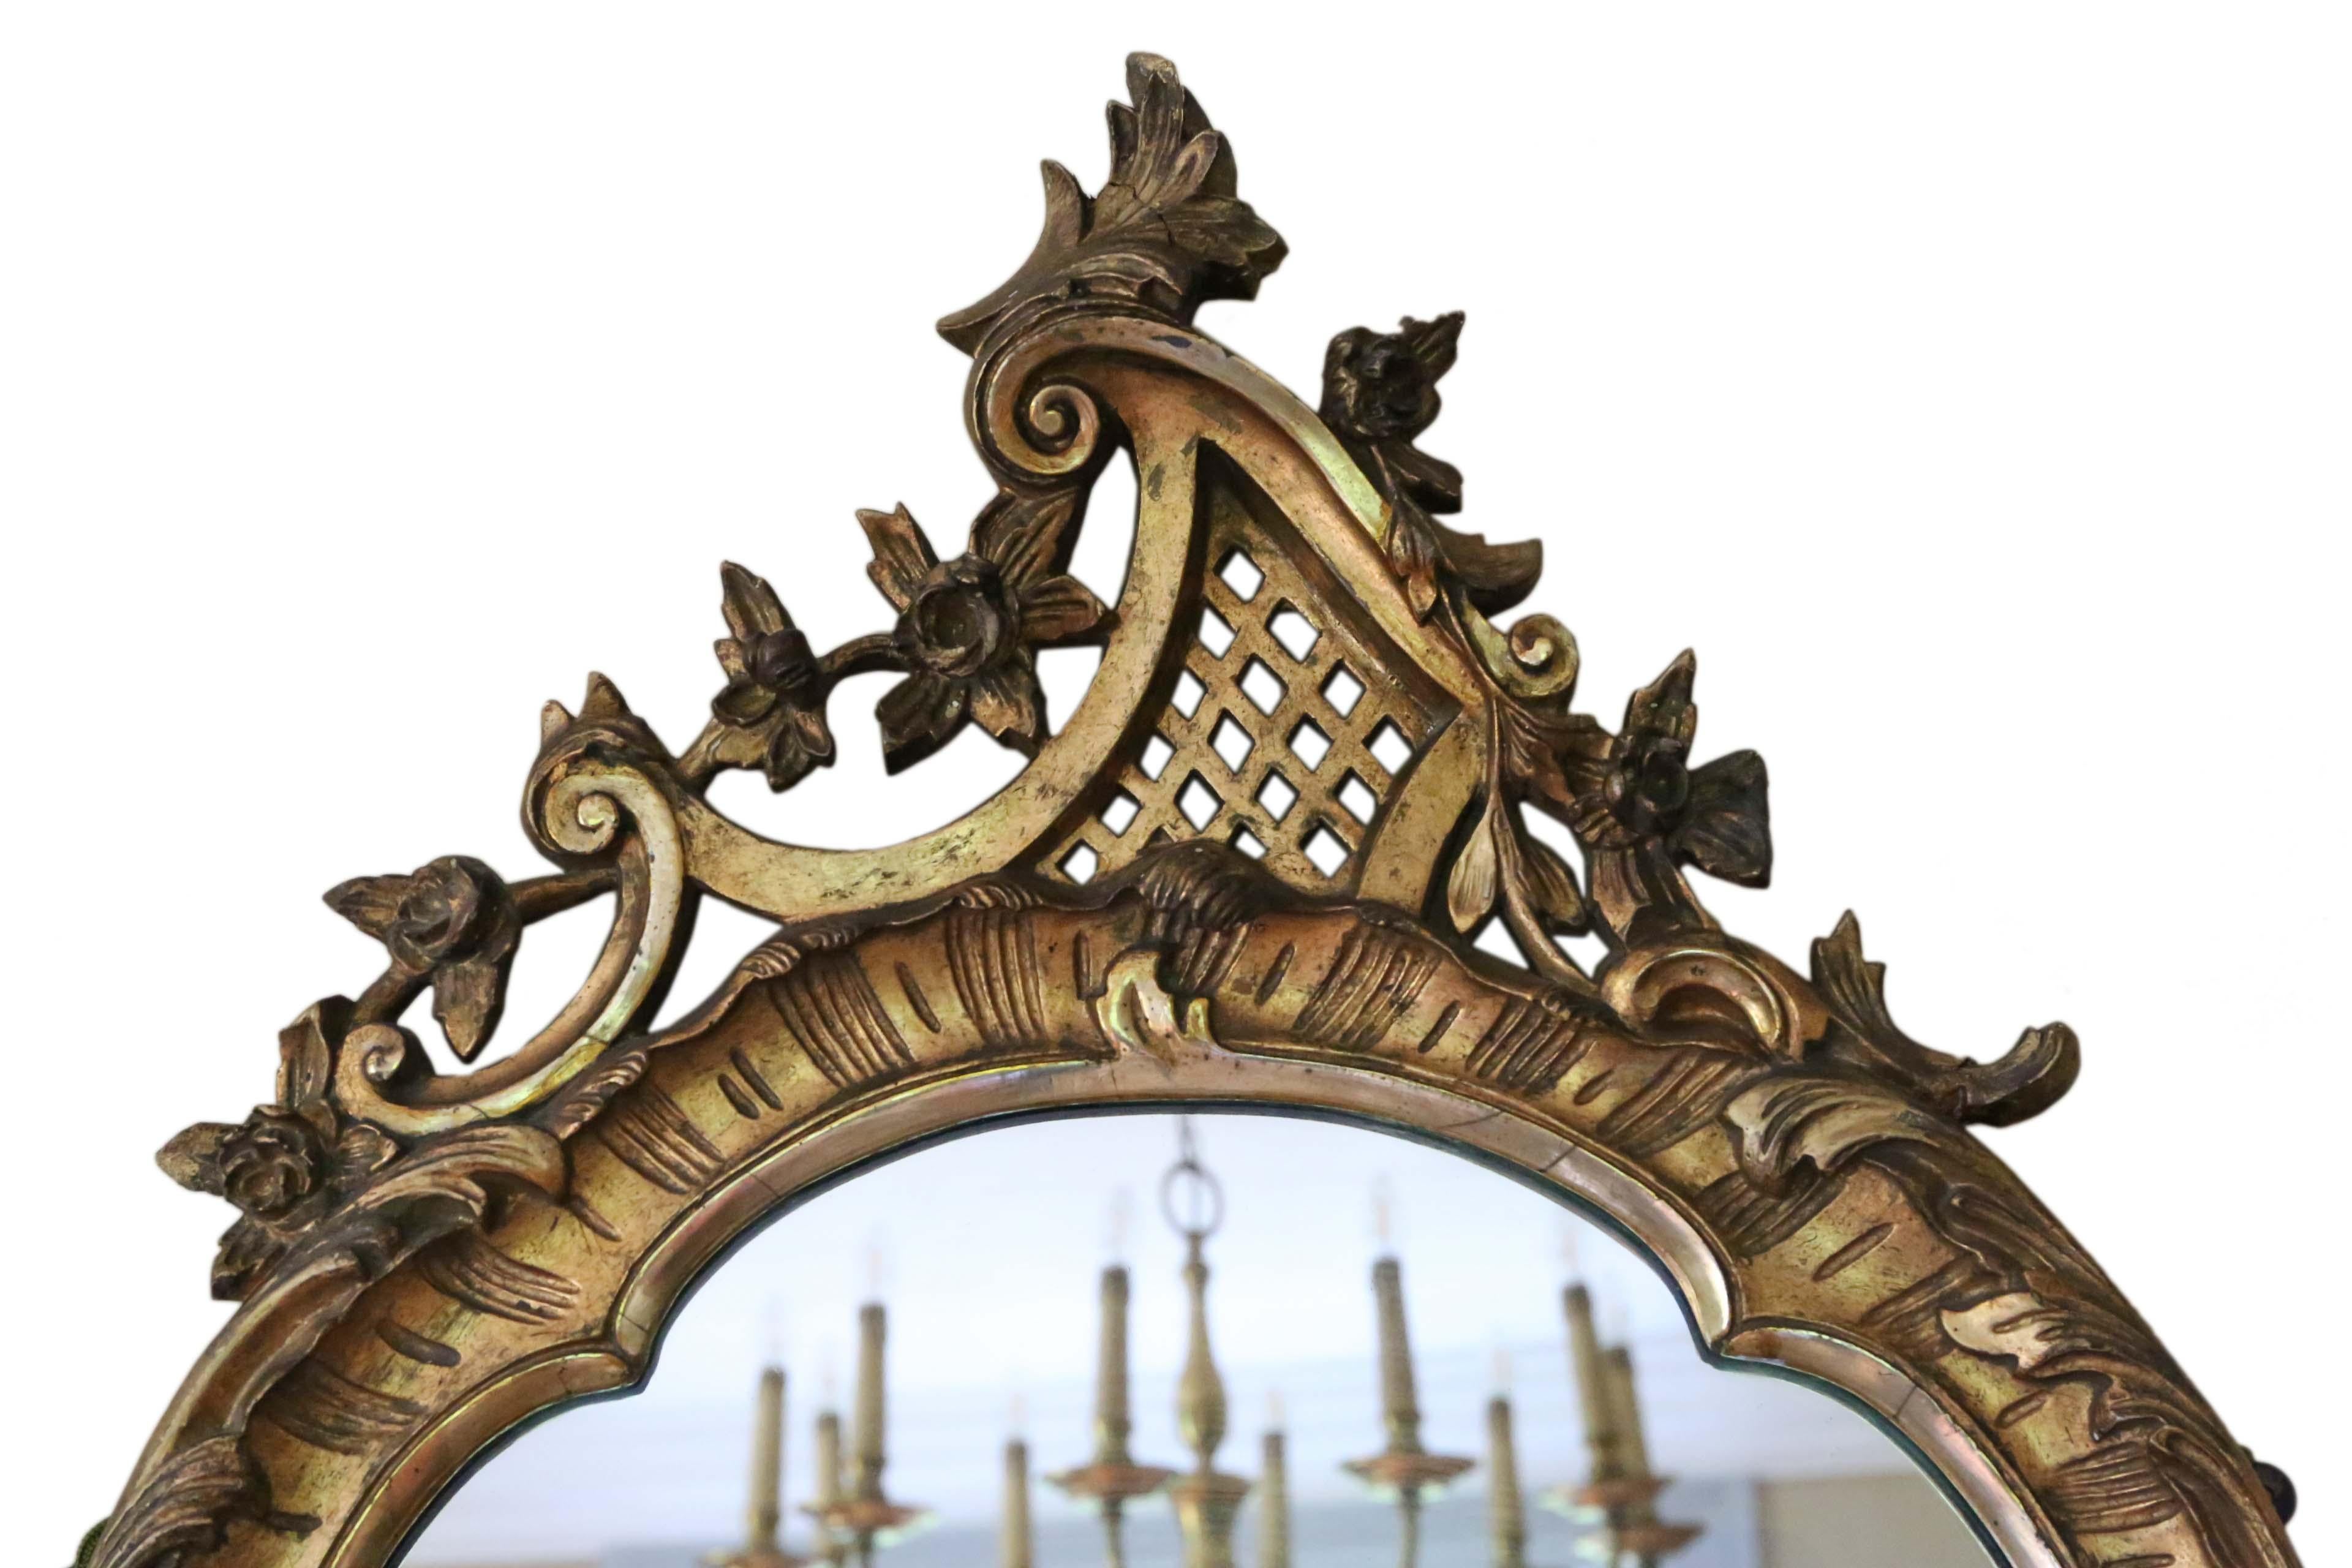 Antique large fine quality gilt 19th century overmantle or wall mirror. Lovely charm and elegance.

An impressive and rare find, that would look amazing in the right location. No woodworm.

The original mirrored glass is in good condition with